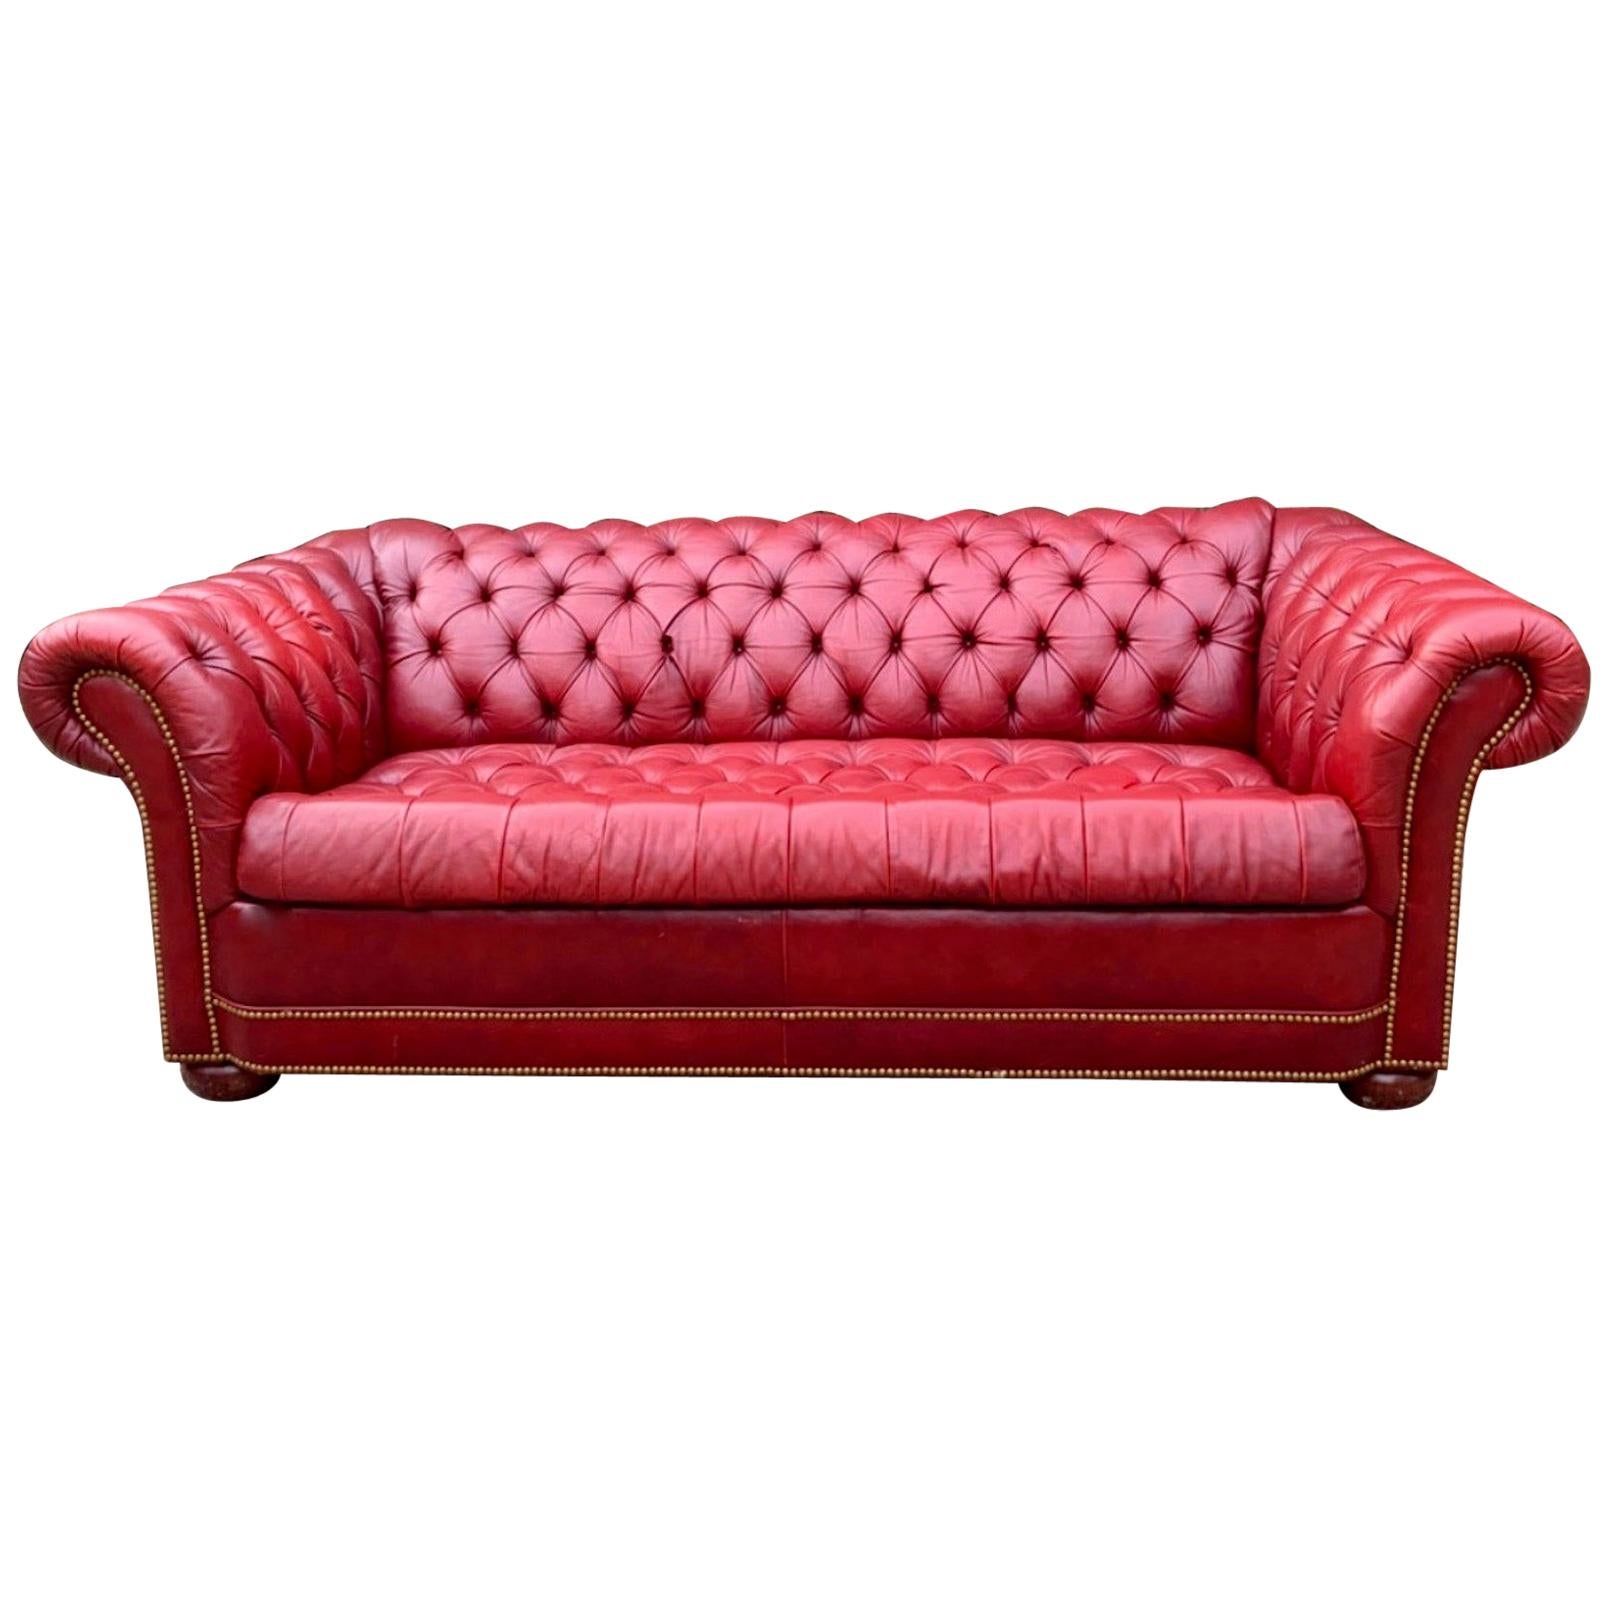 Red Leather Tufted Chesterfield Sleeper